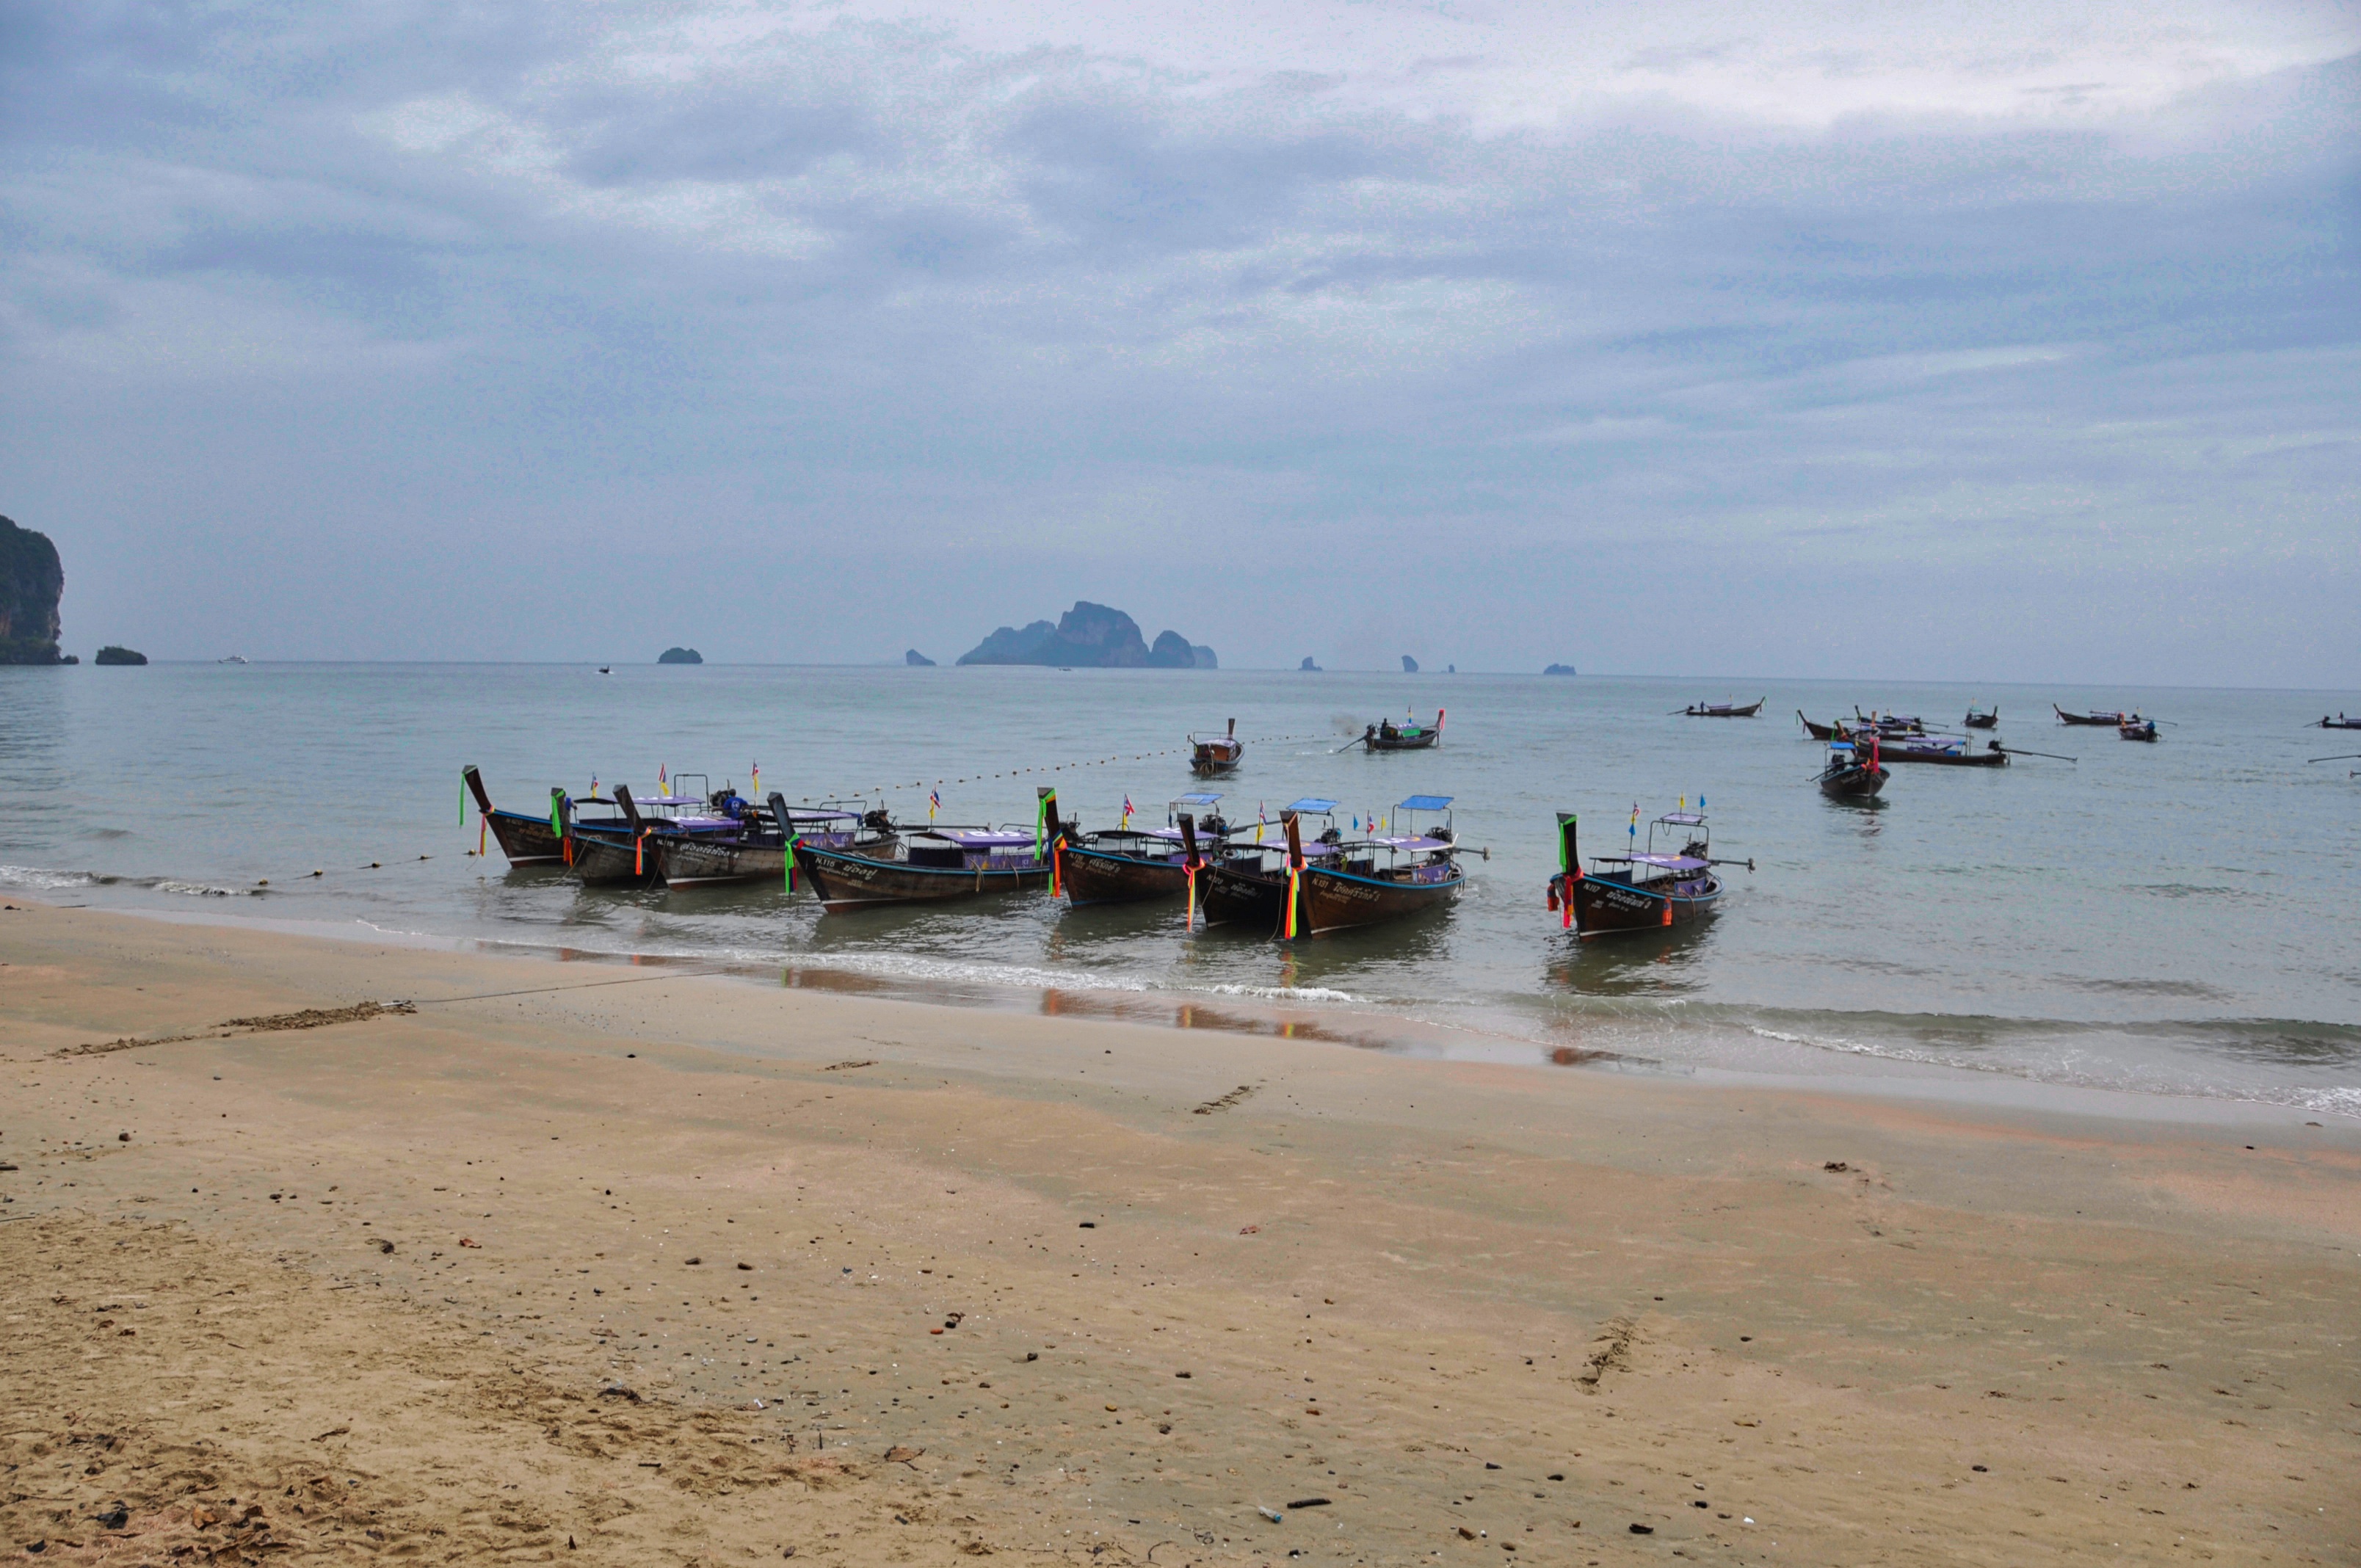 Two Travel The World - Railay Beach: a remote paradise